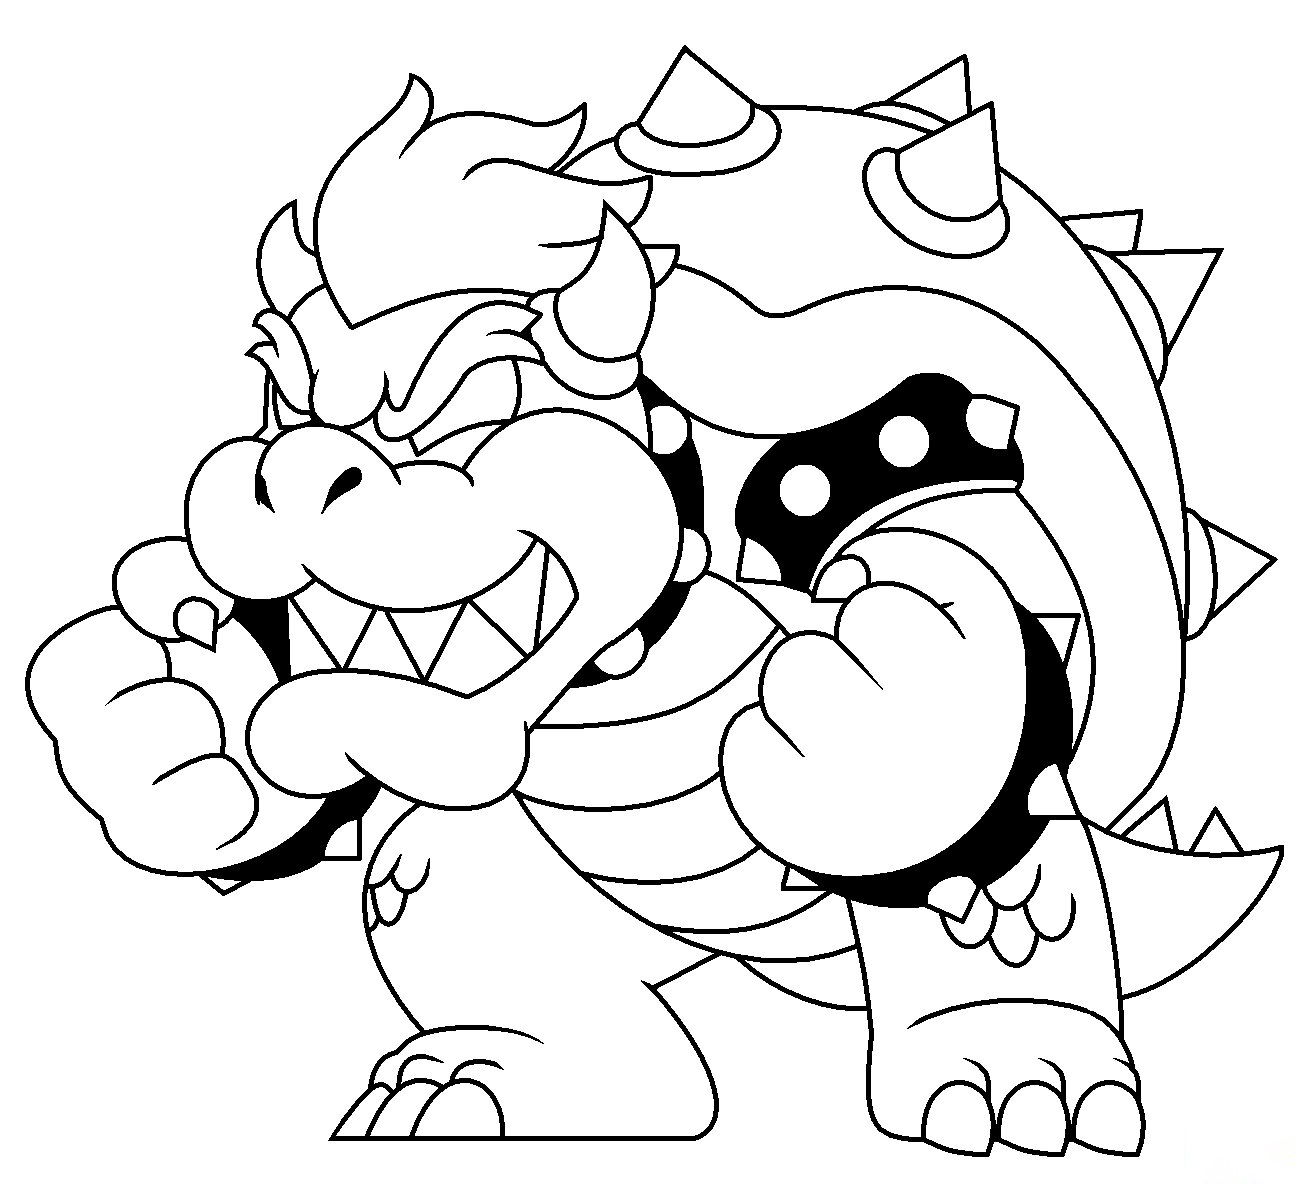 Strength of Bowser in Super Mario 3D World Coloring Page